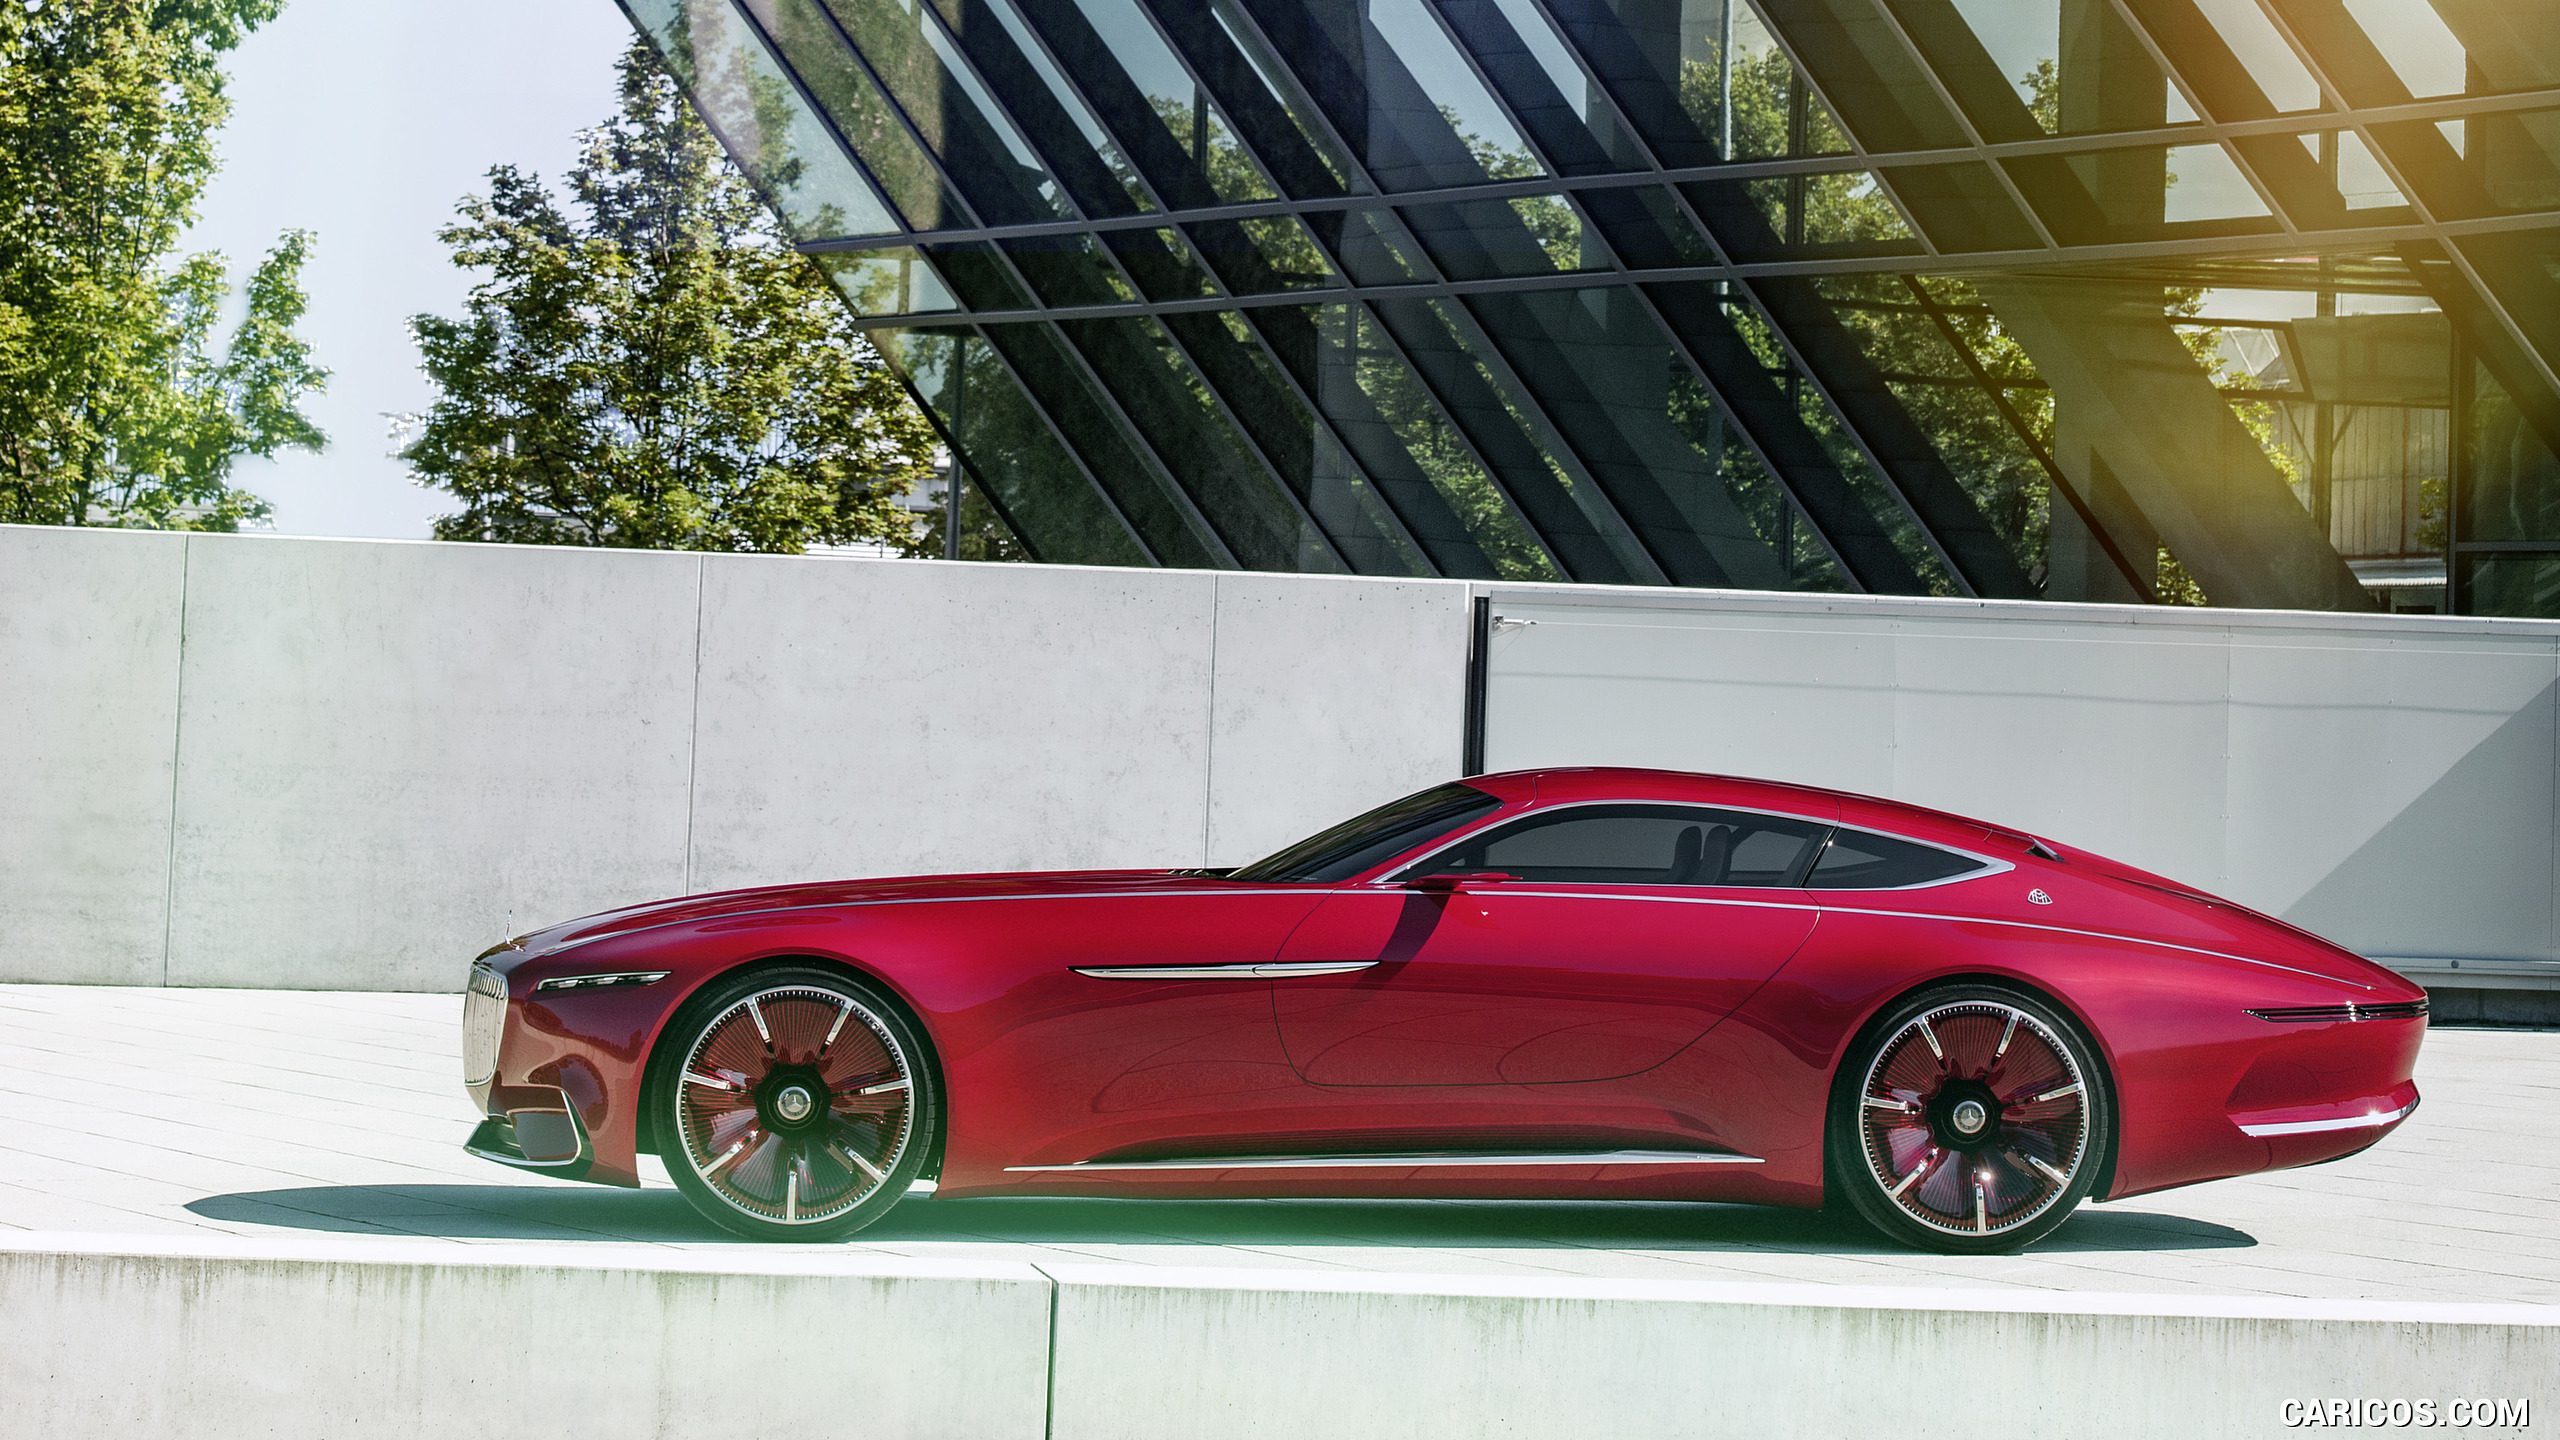 2016 Mercedes-Maybach 6 Concept - Side, #30 of 31